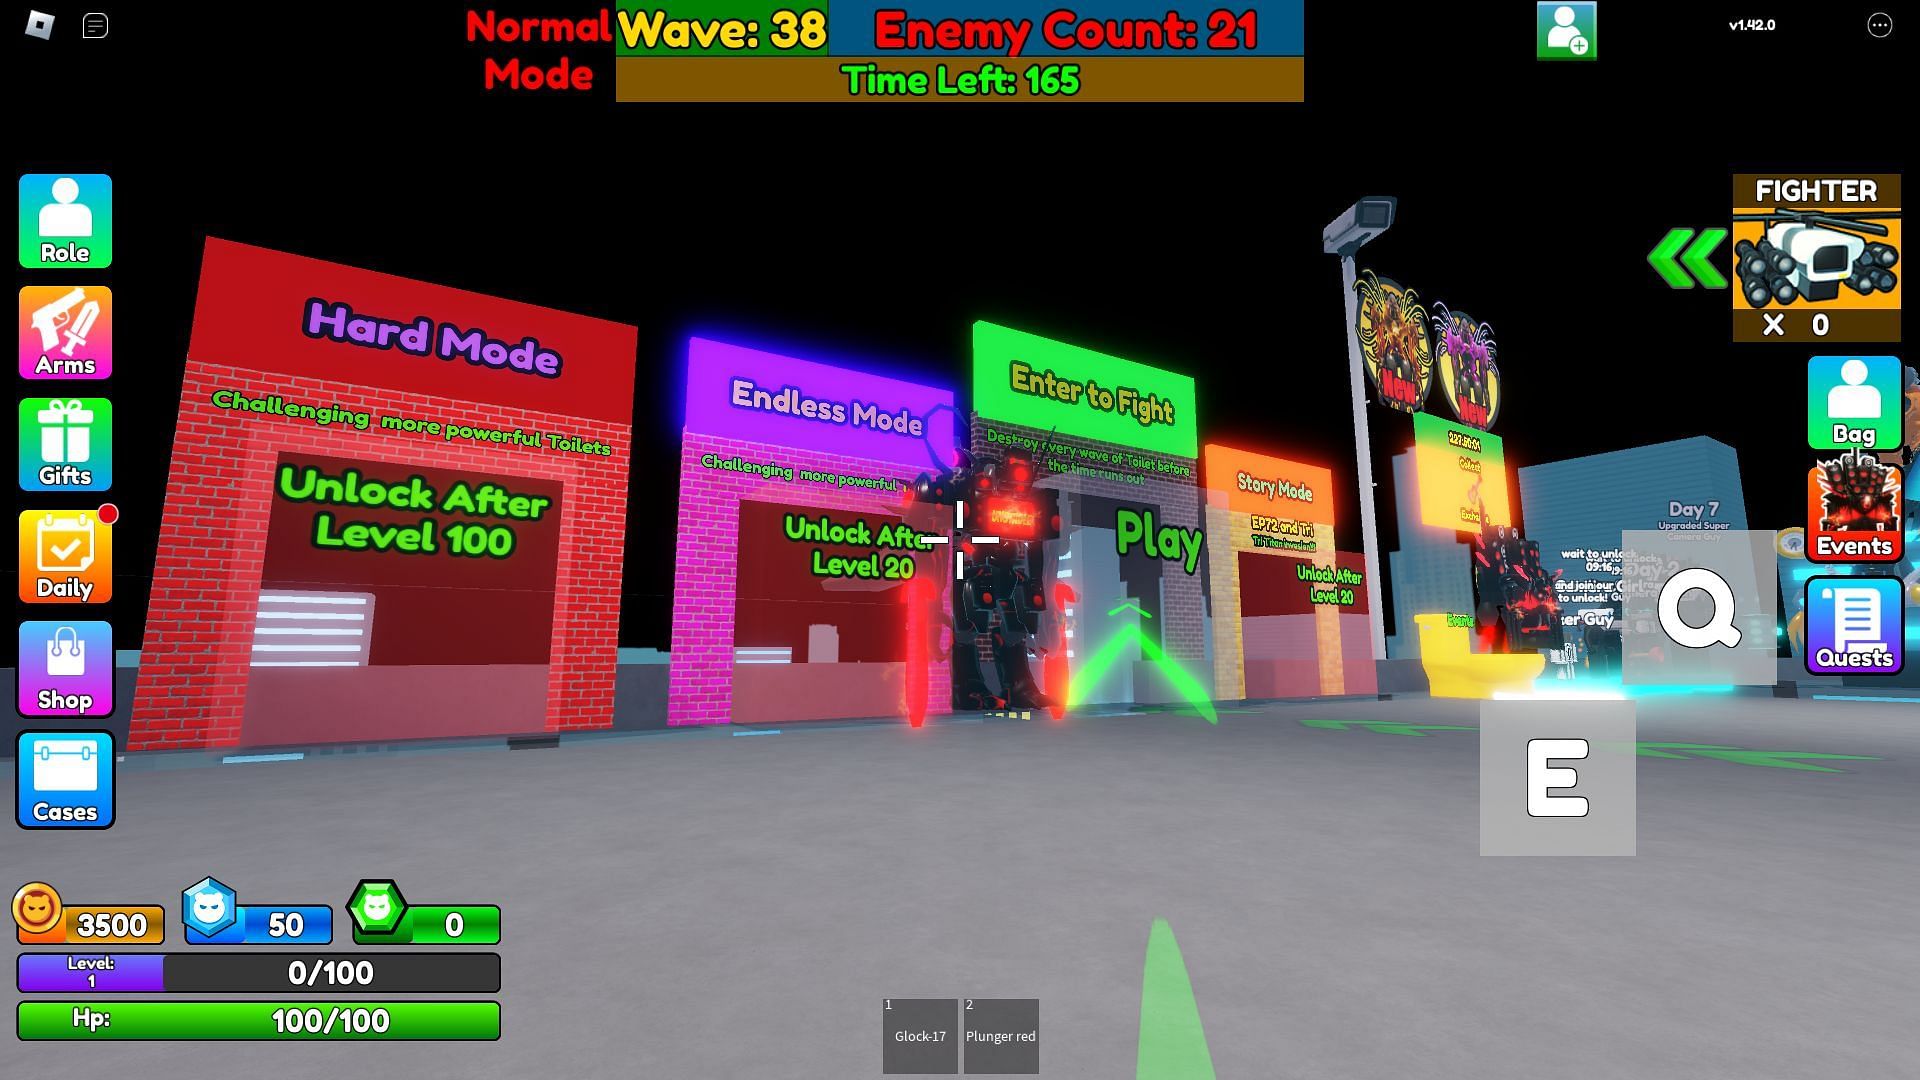 Game modes can be selected from the lobby. (Image via Roblox)